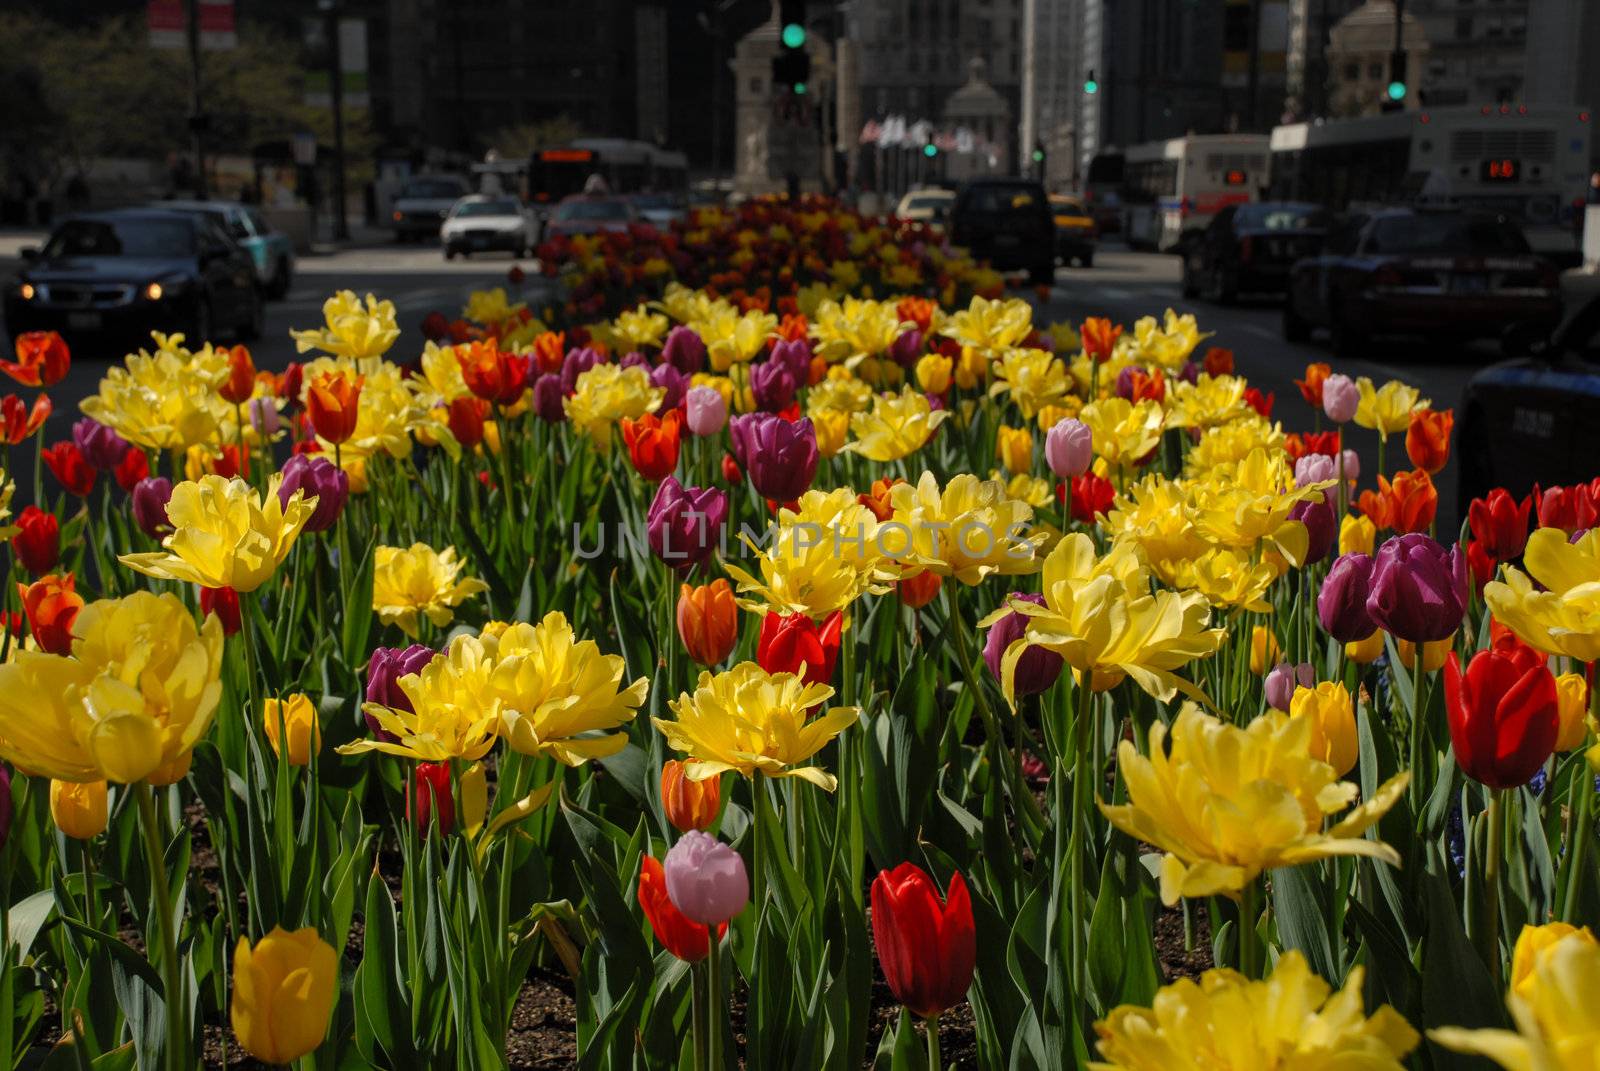 View of the downtown street with beautiful spring flowers